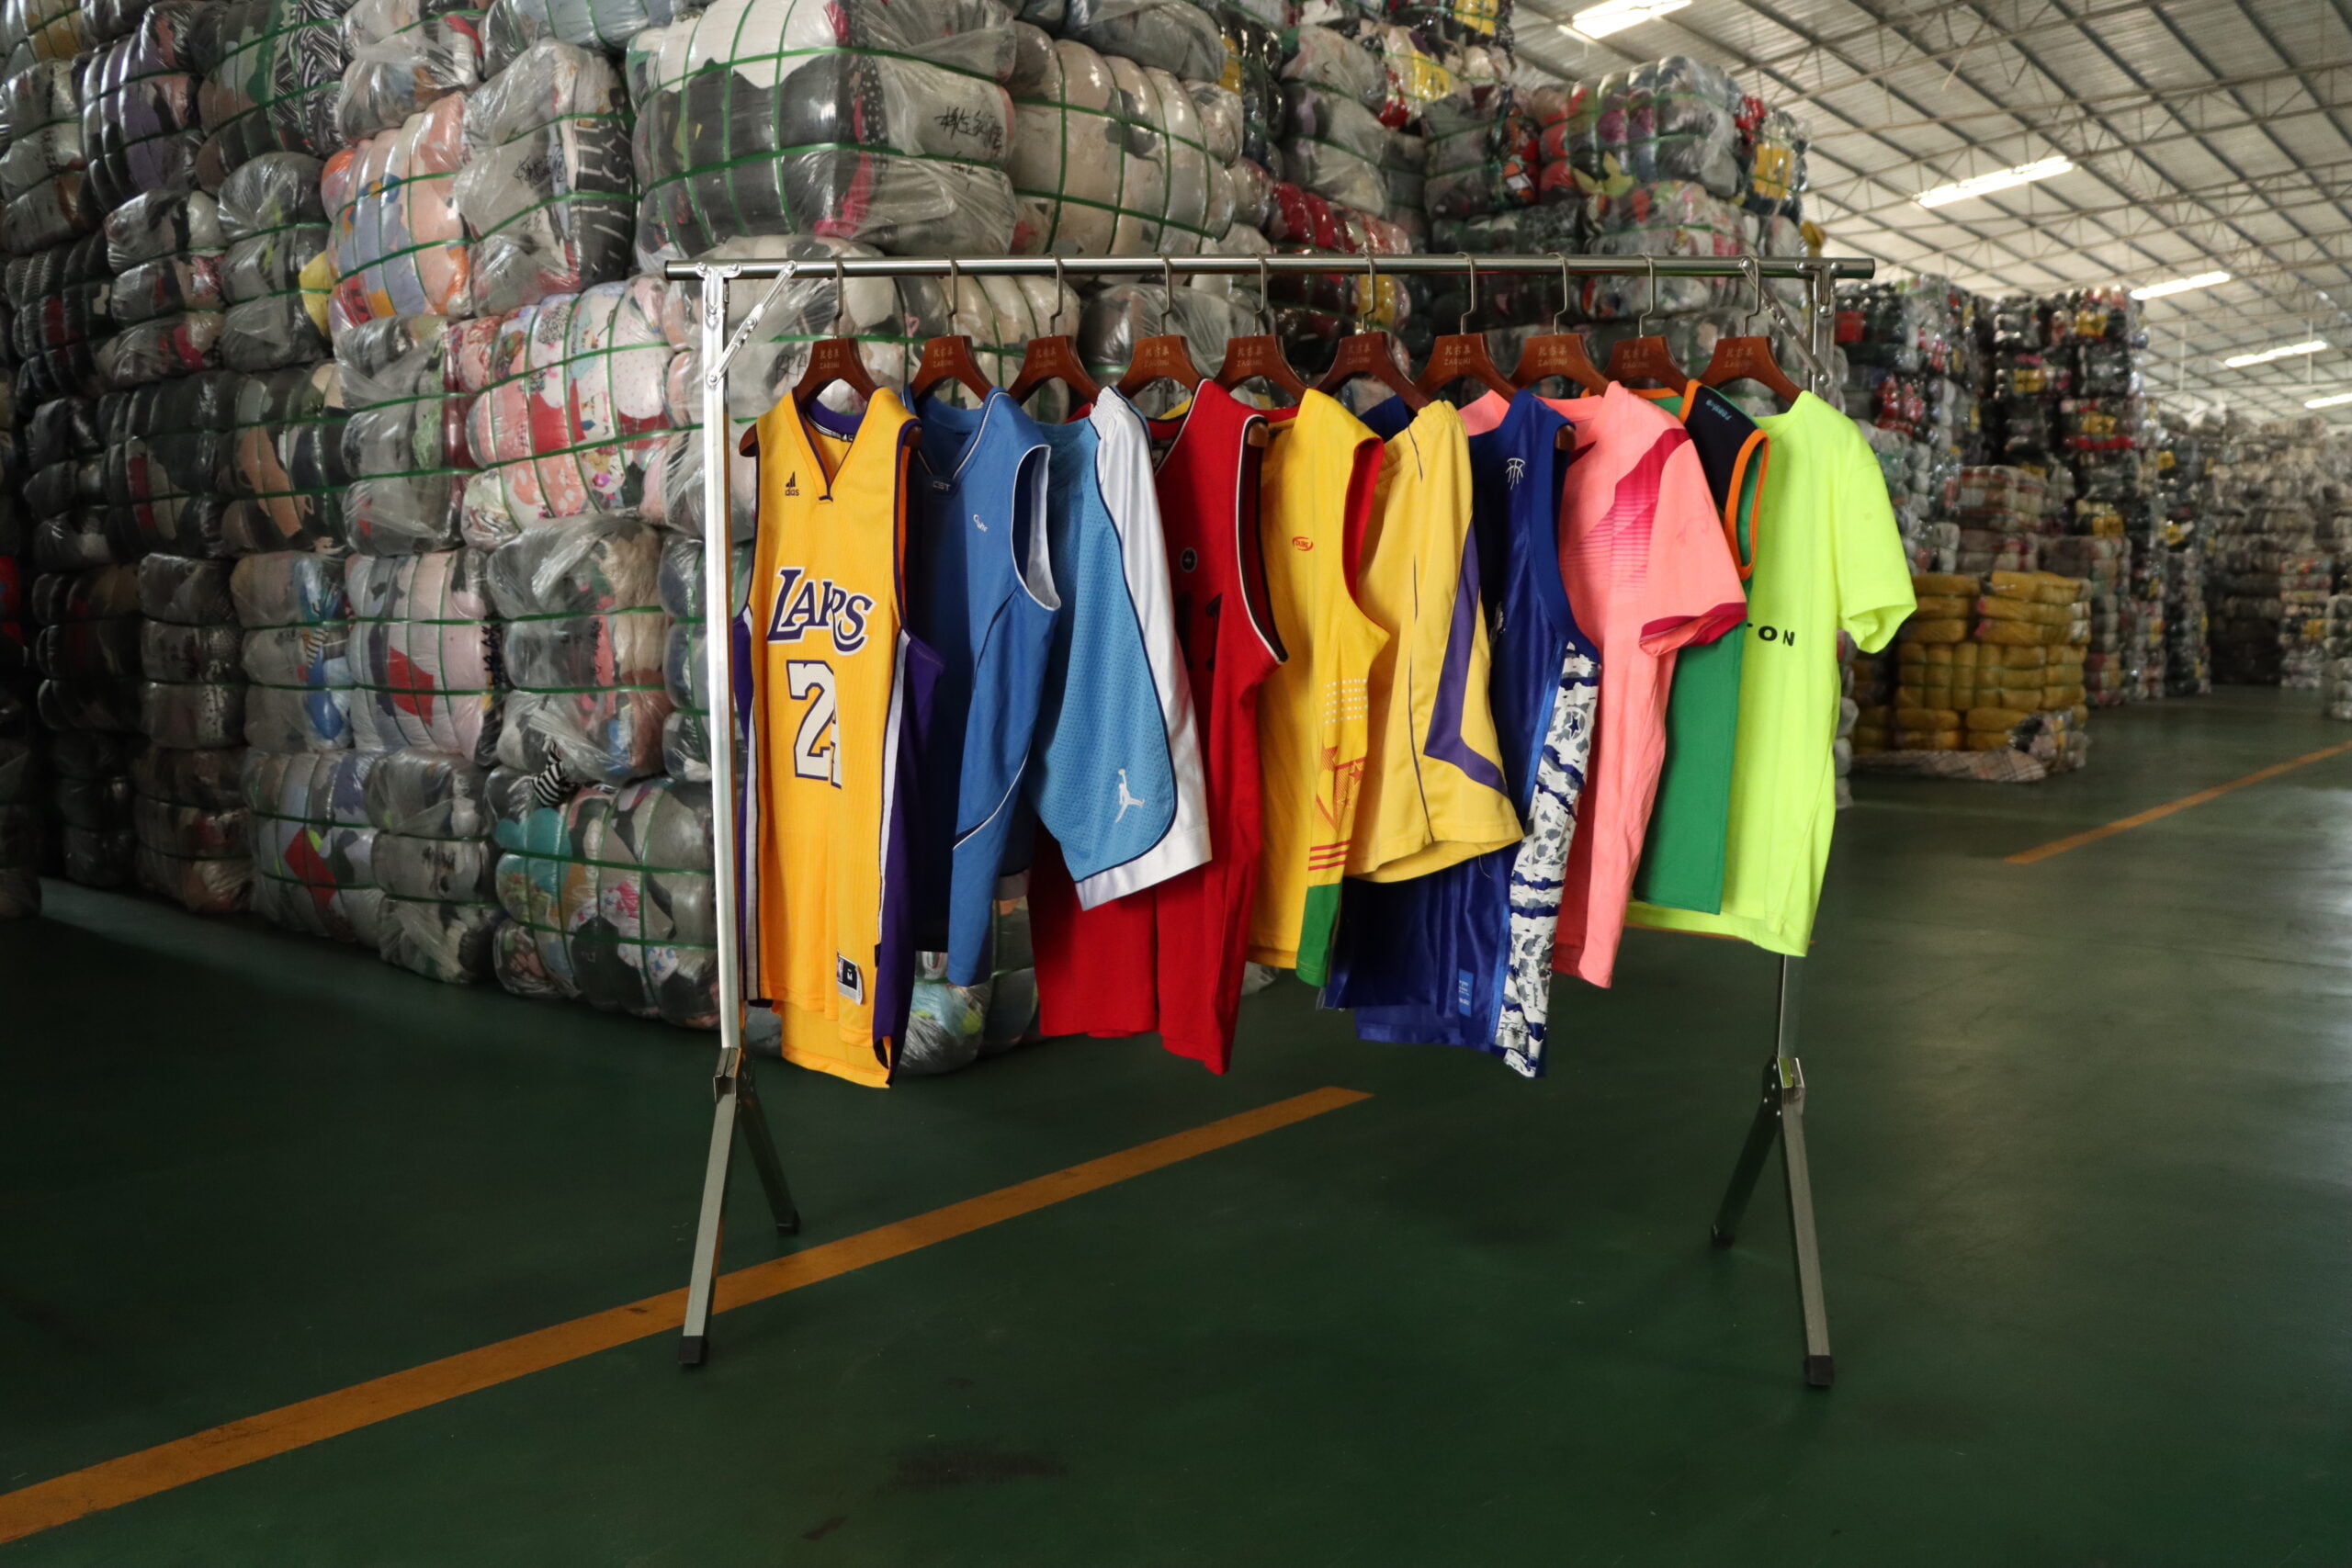 How Profitable Recycling Used Clothes Is!